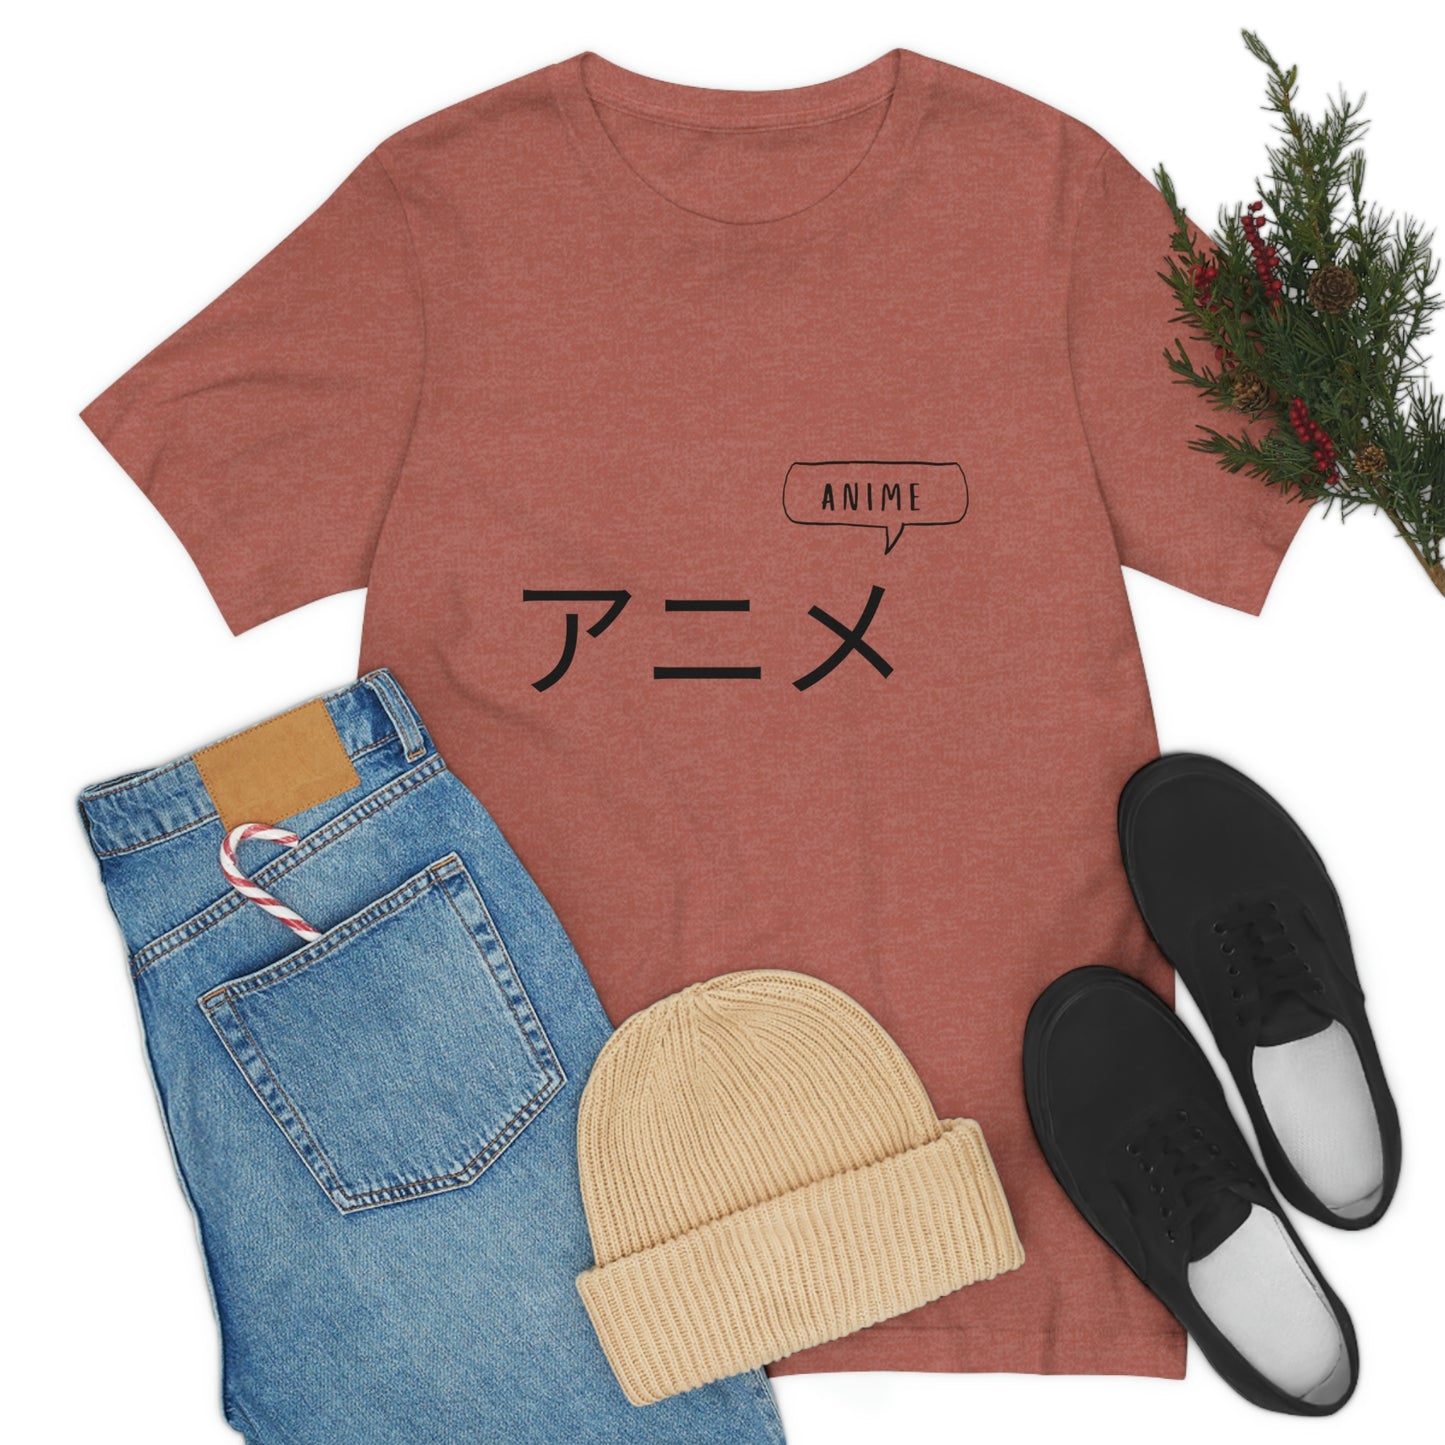 Our Unisex Anime Tee is a must-have featuring beautiful anime art on the back and a classic "Anime" sign on the front, made with high-quality material it's a great addition to your wardrobe.